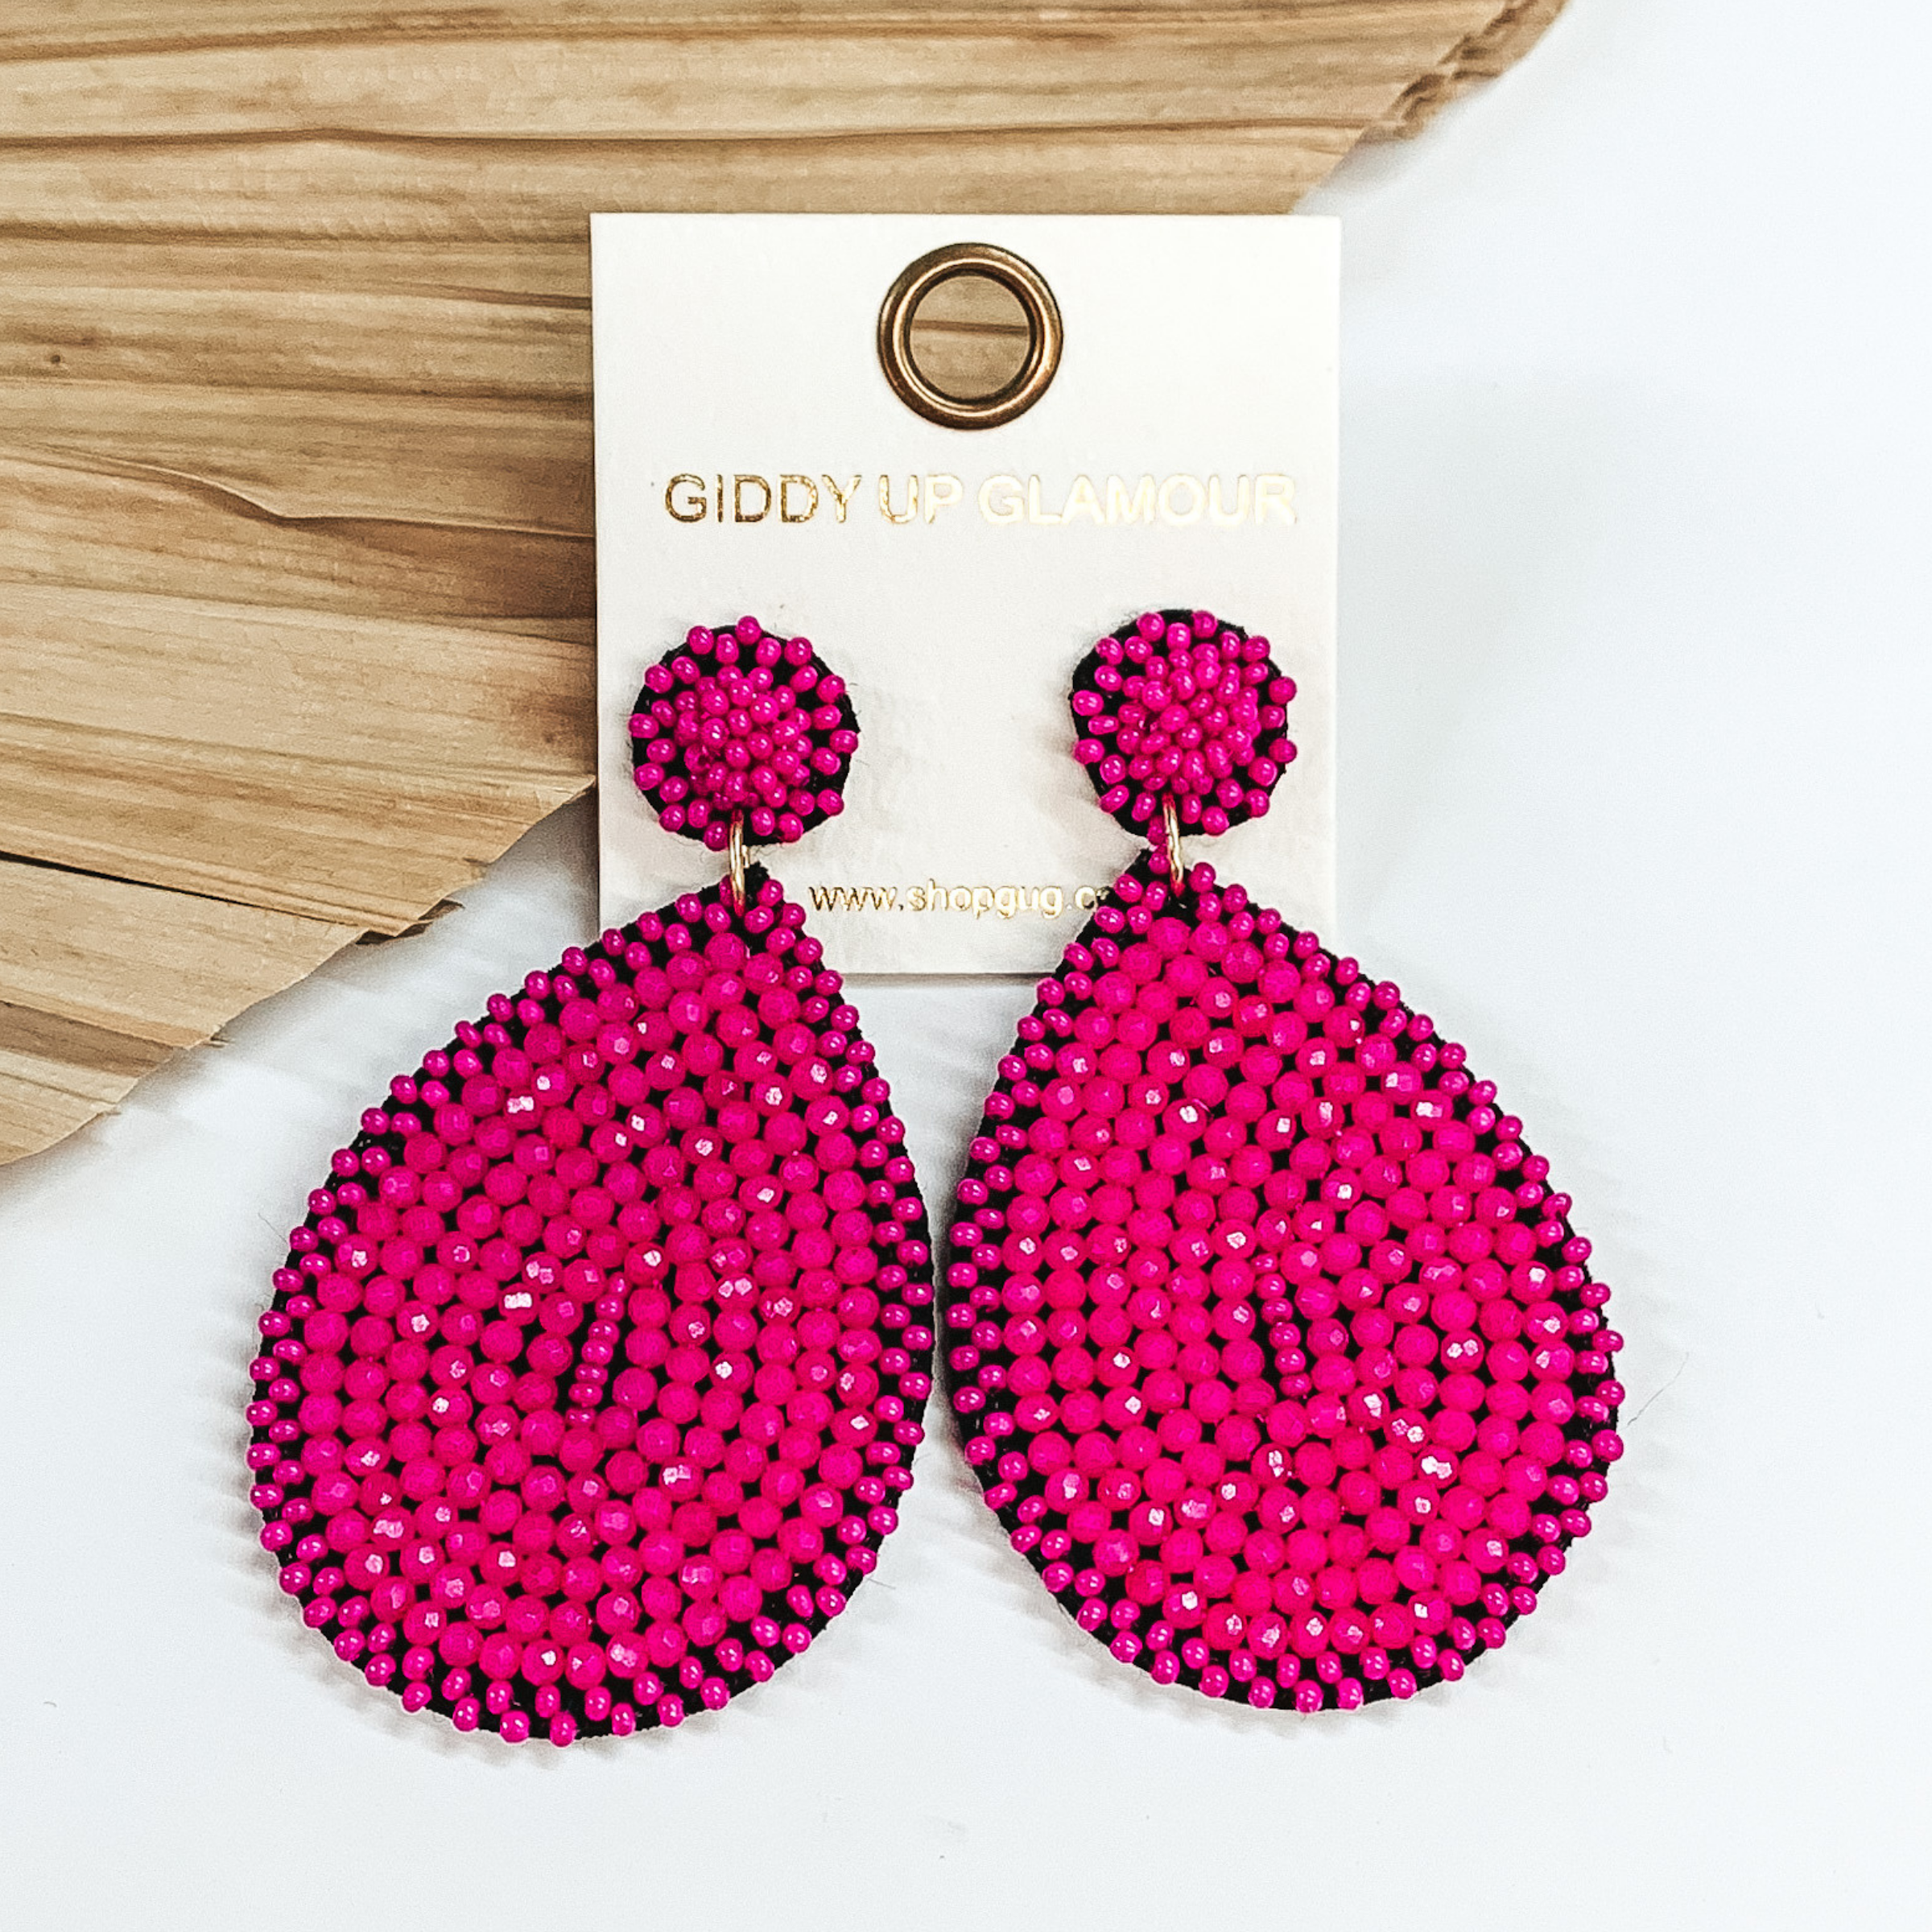 Pink beaded drop earrings in a teardrop shape. These earrings are pictured on a white background with a dried palm leaf in the background.